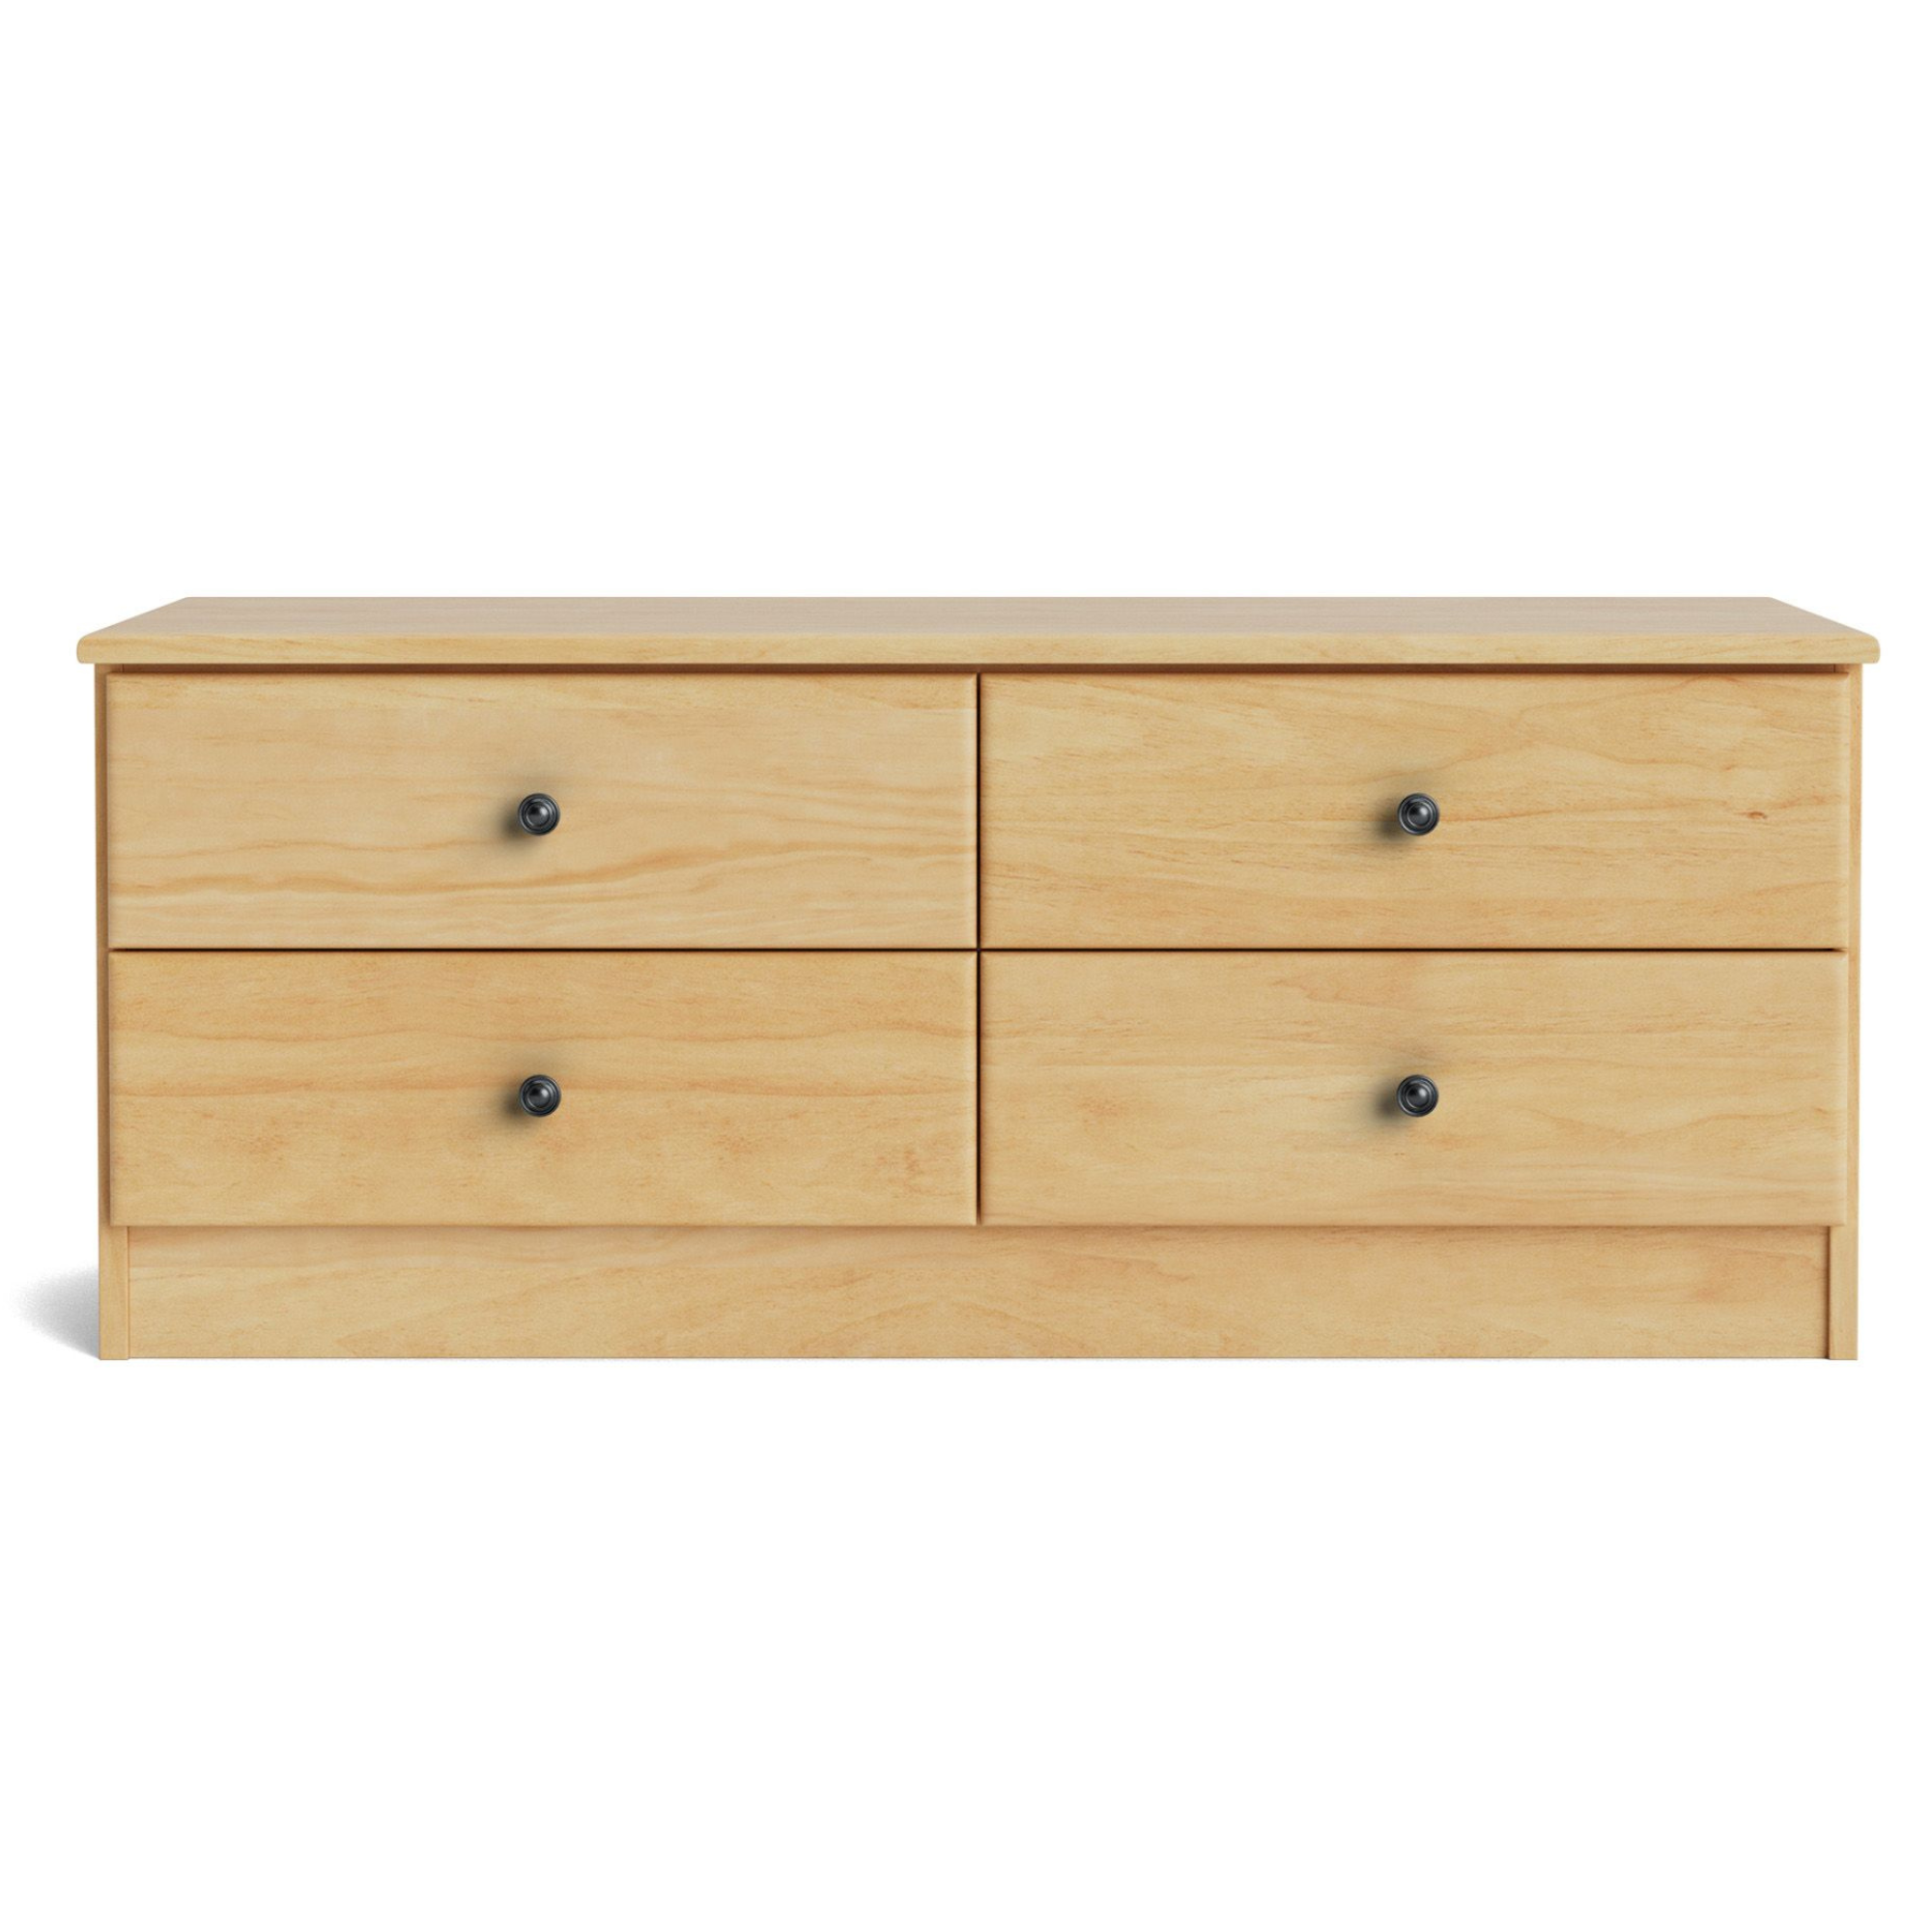 NORTHVILLE 4 DRAWER BED-END CHEST | NZ MADE